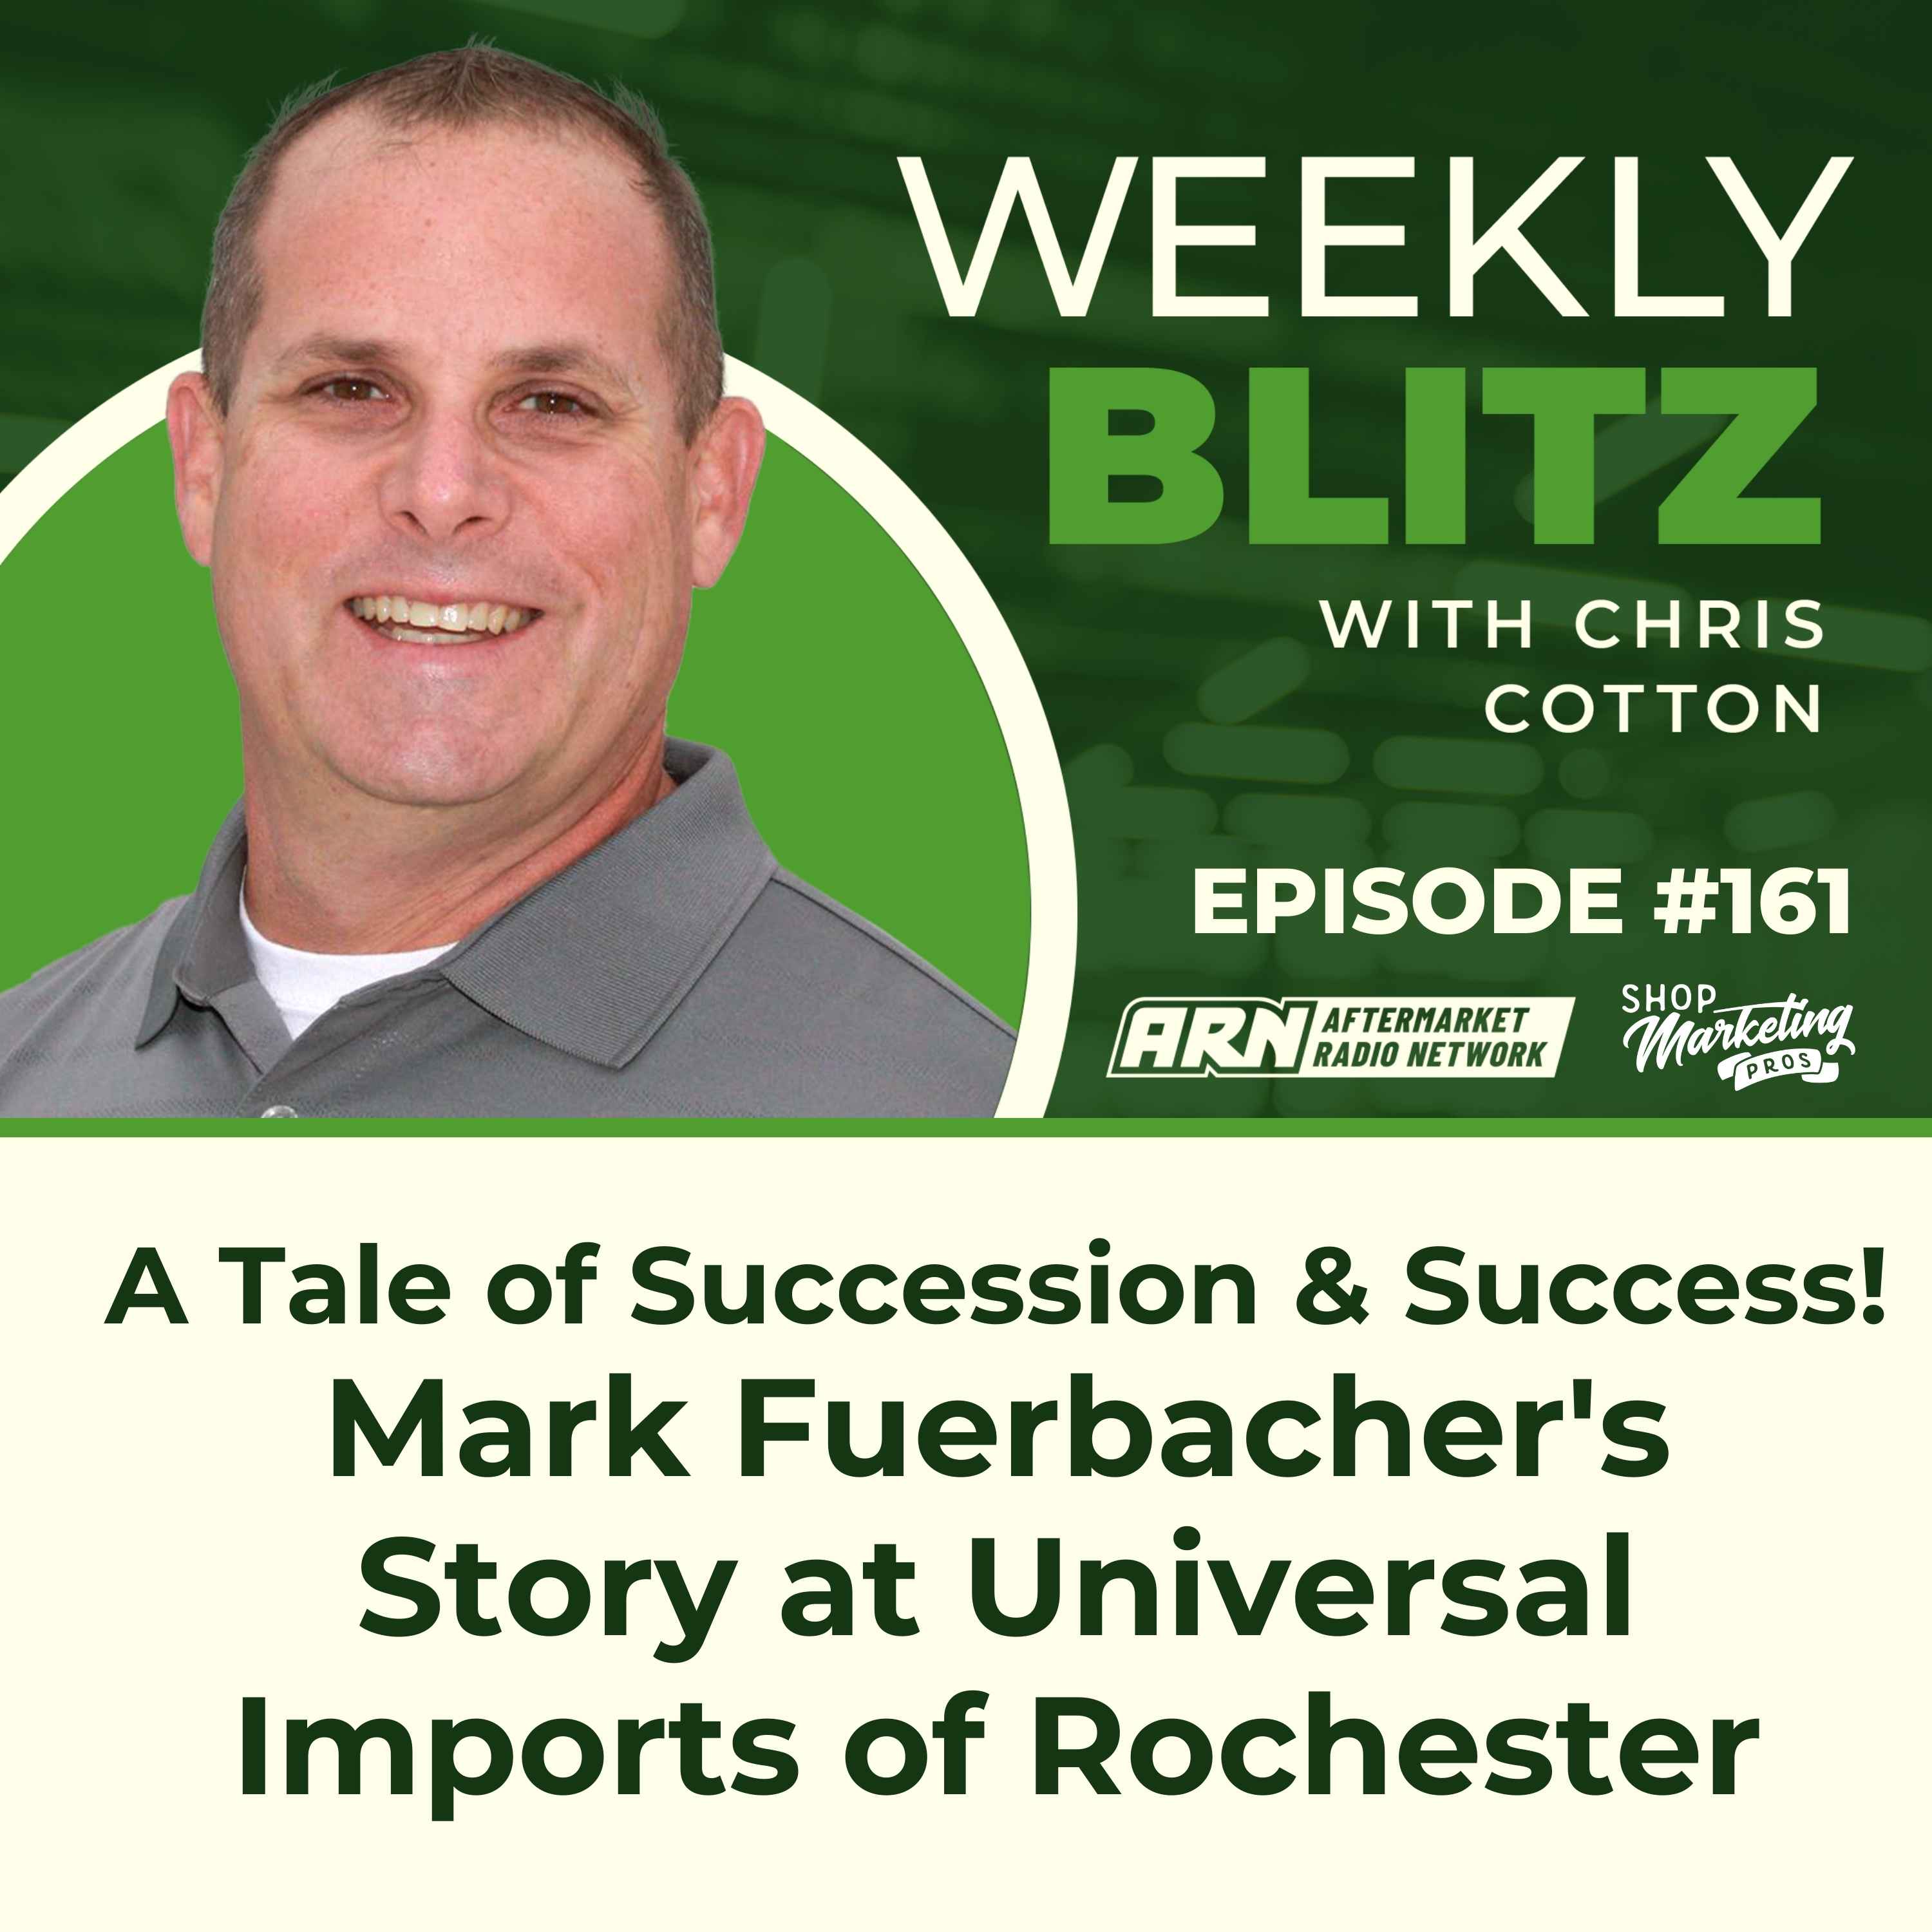 A Tale of Succession & Success! Mark Fuerbacher’s Story at Universal Imports of Rochester. [E161] - Chris Cotton Weekly Blitz